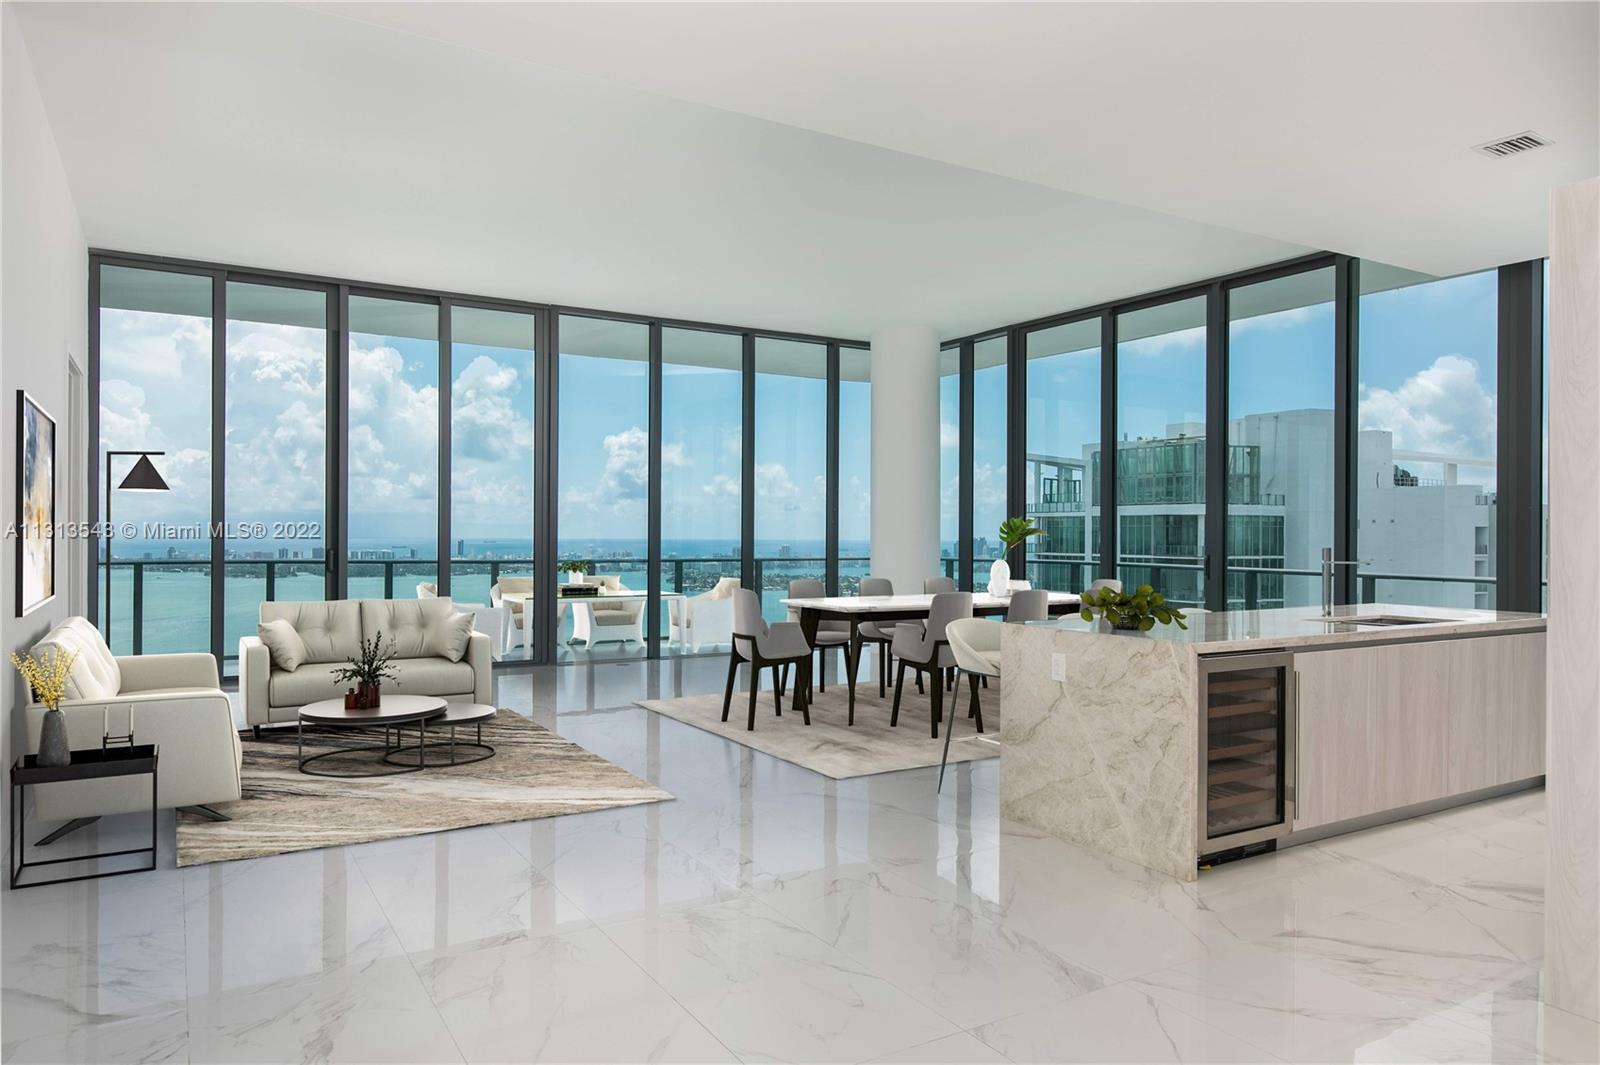 One of a kind stunning PH with unobstructed ocean views. 4 beds and 4 1/2 baths with gorgeous floors